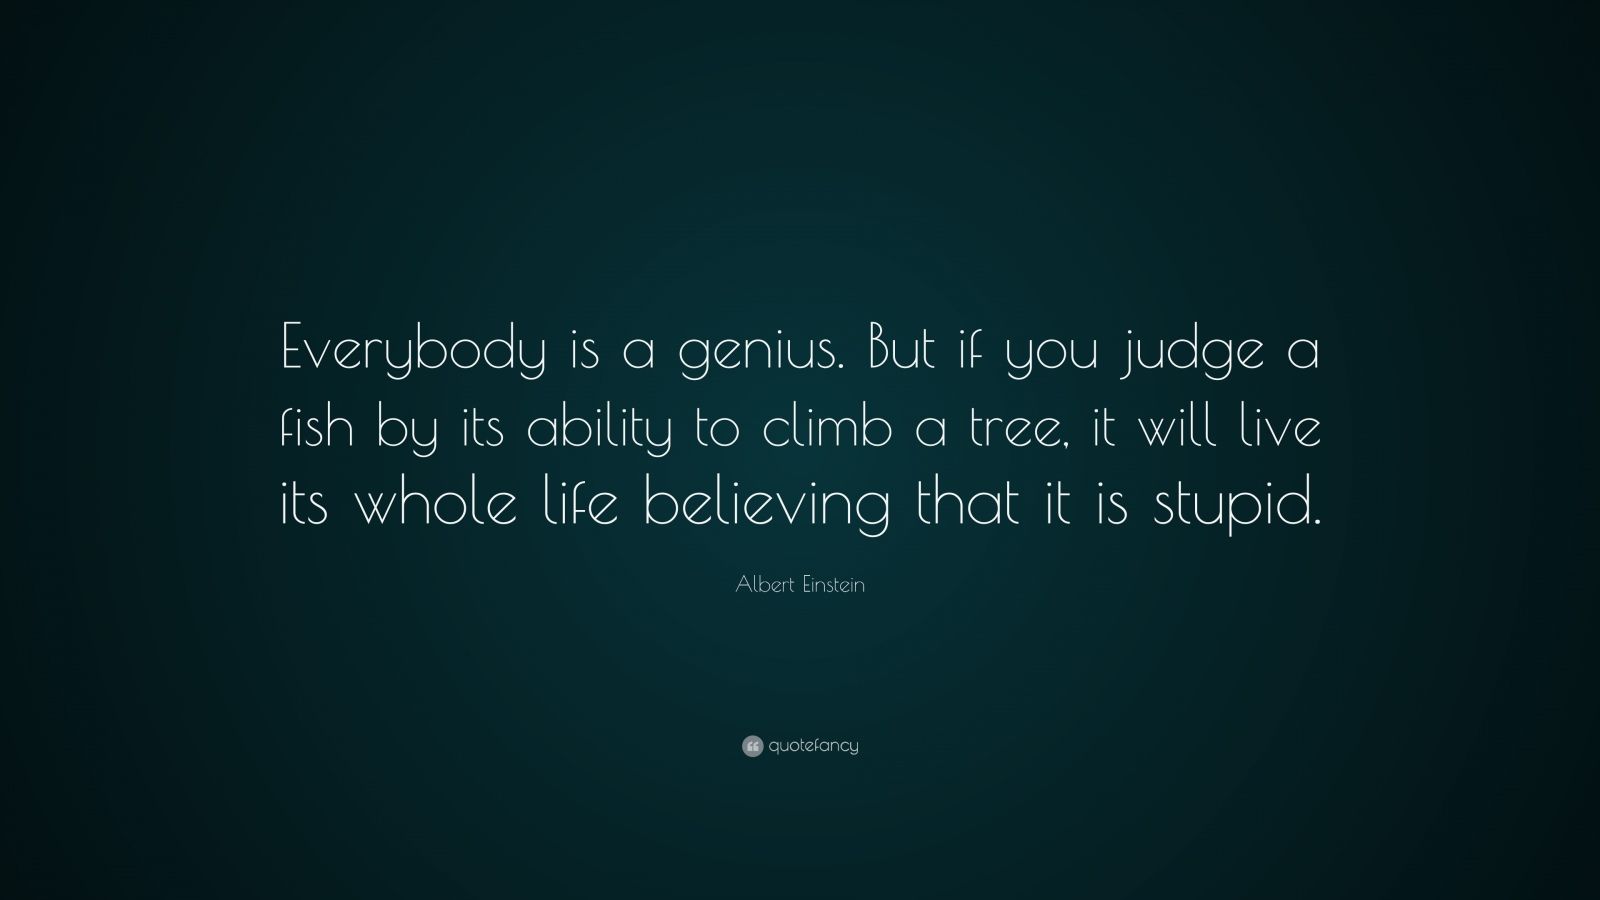 Albert Einstein Quote: “Everybody is a genius. But if you judge a fish by  its ability to climb a tree, it will live its whole life believing th...”